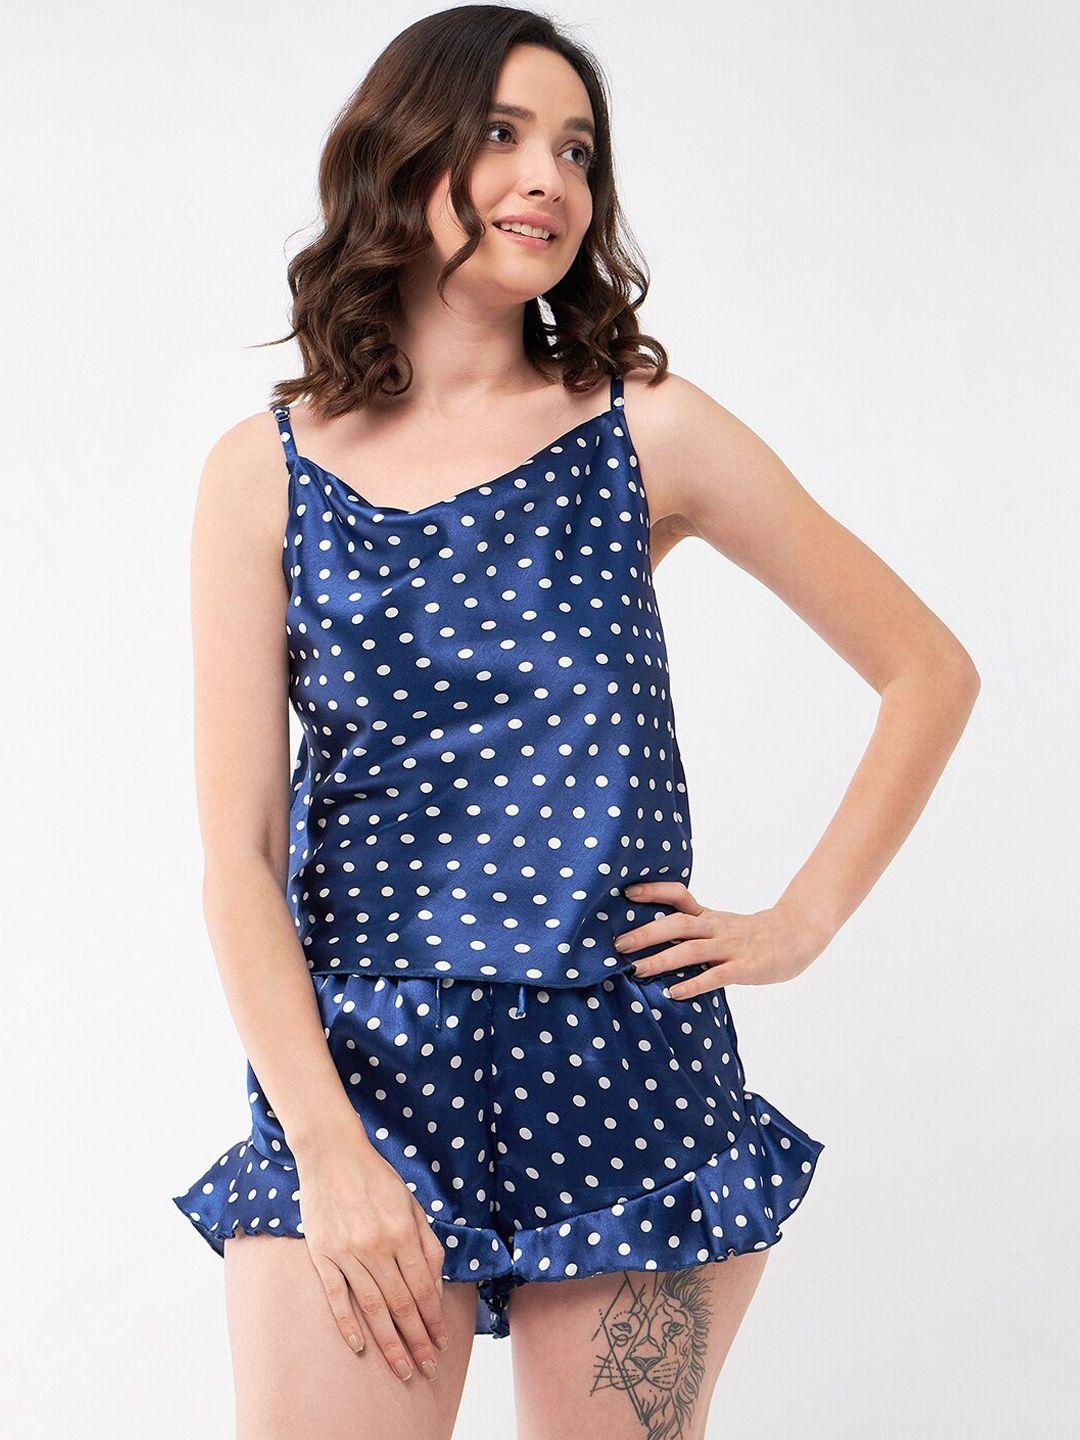 magre--blue-&-white-polka-dots-printed-satin-night-suit